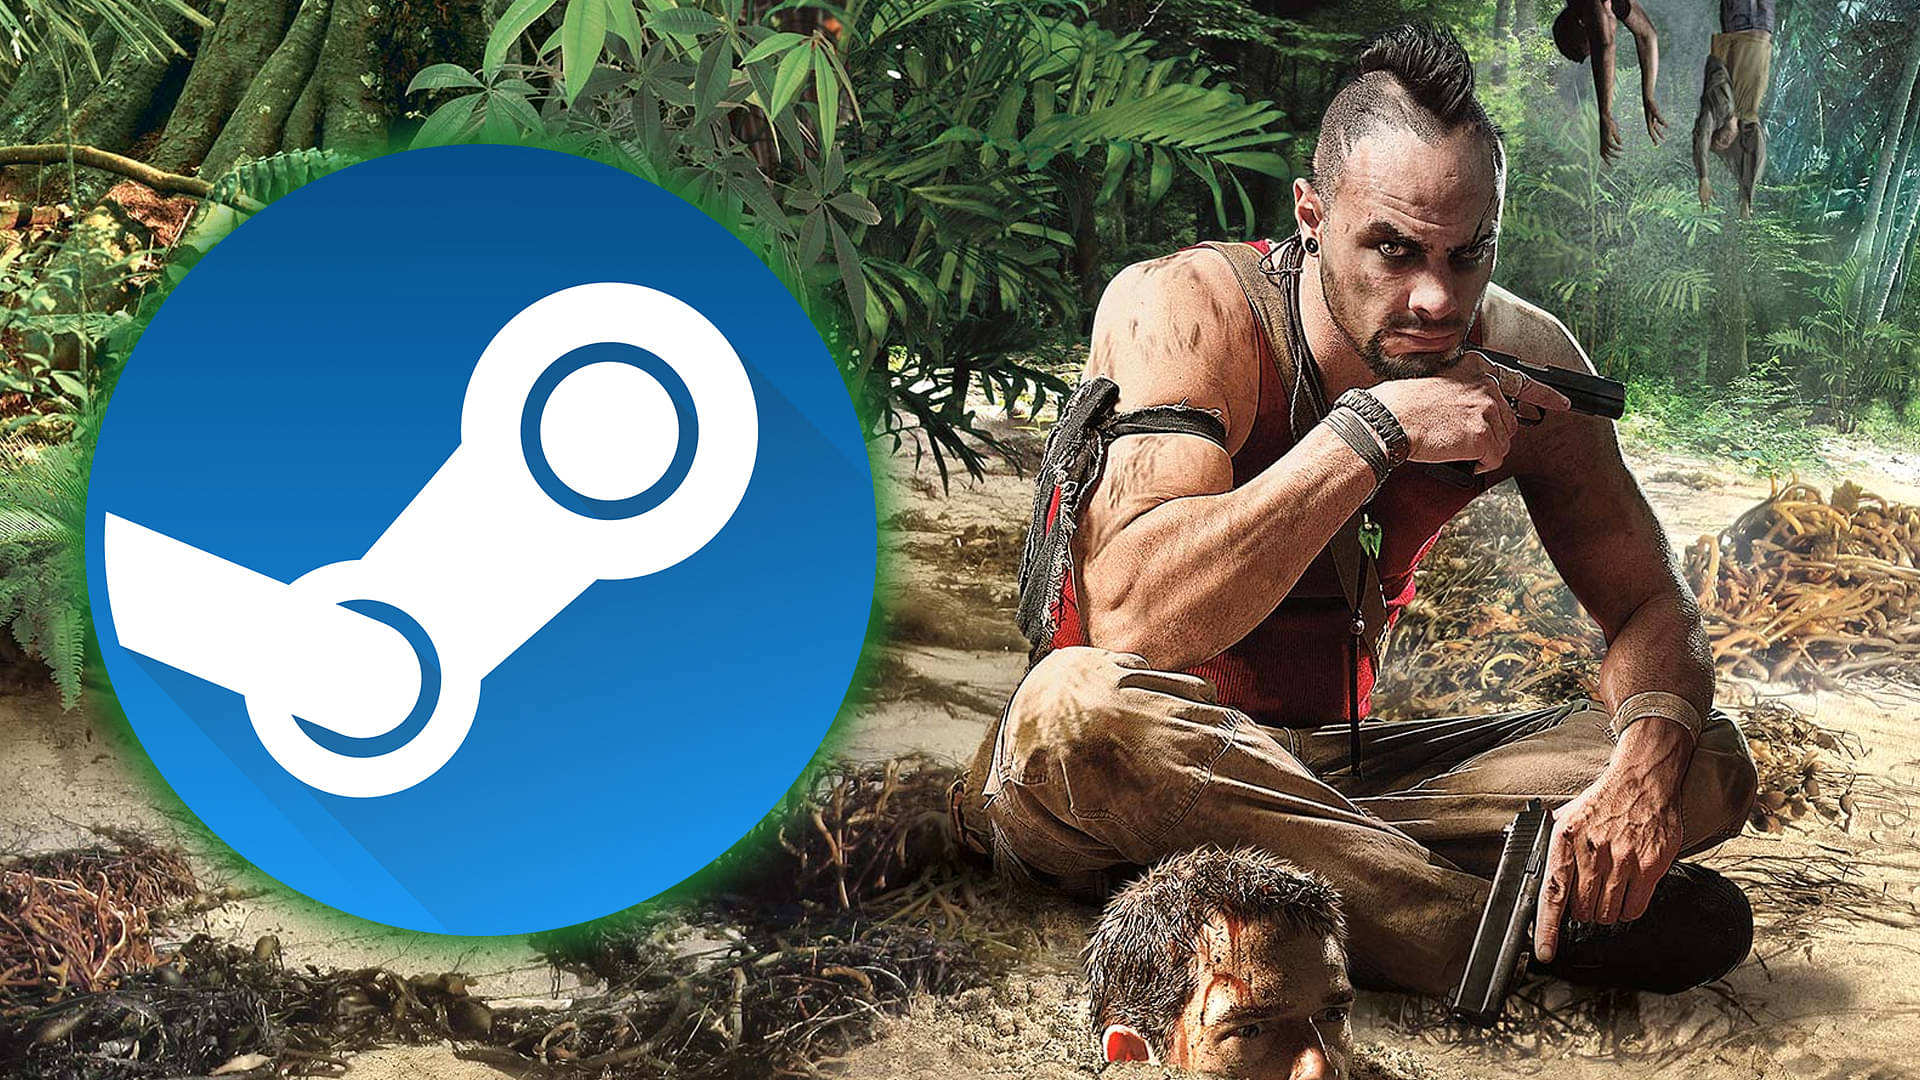 An image showing the main cover of Far Cry 3 with the Steam logo on left